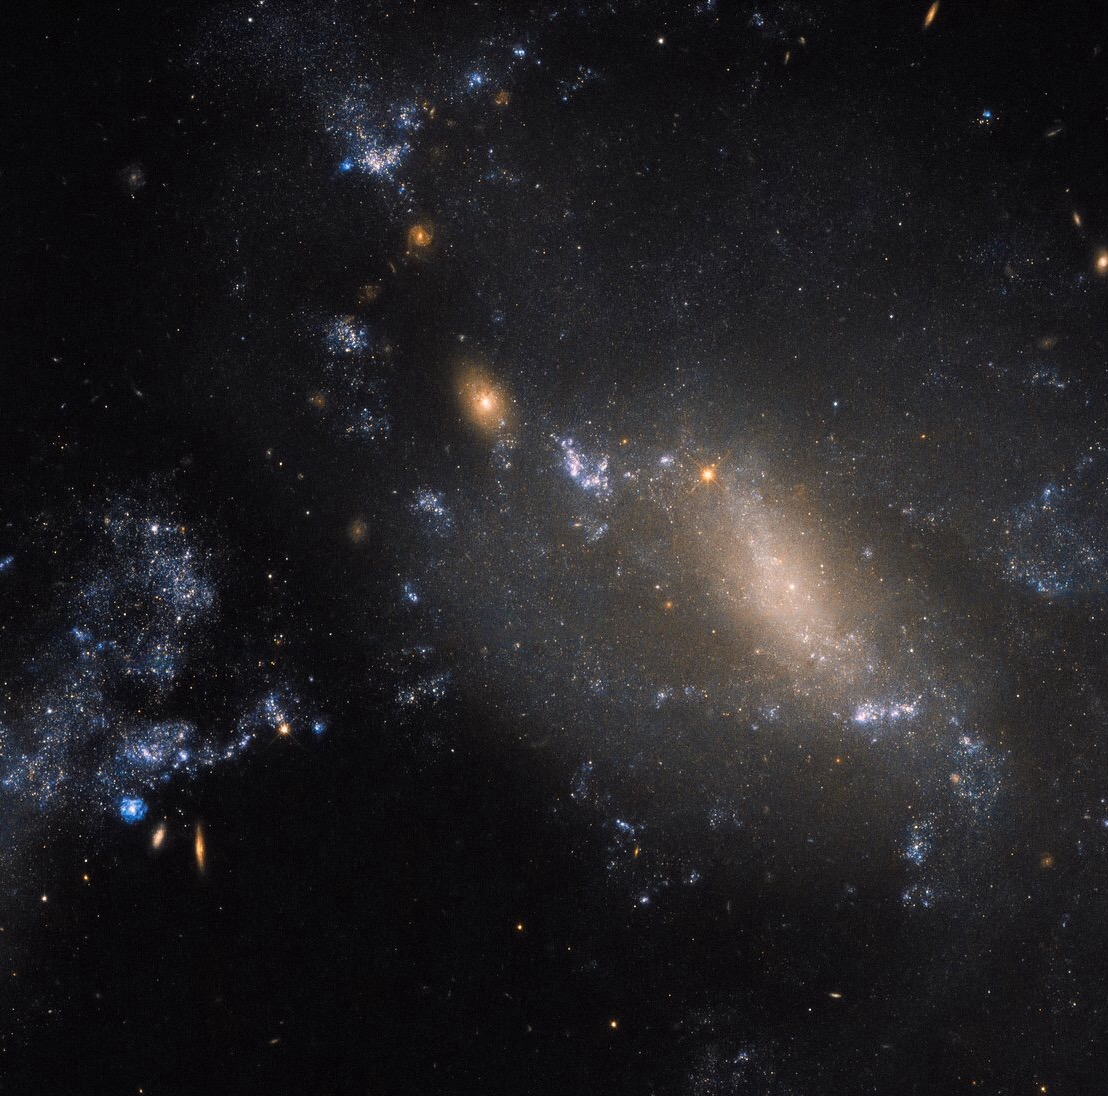 Some galaxies are harder to classify than others. Here, Hubble’s trusty Wide Field Camera 3 (WFC3) has captured a striking view of two interacting galaxies located some 60 million light-years away in the constellation of Leo (The Lion). The more diffuse and patchy blue glow covering the right side of the frame is known as NGC 3447 — sometimes NGC 3447B for clarity, as the name NGC 3447 can apply to the overall duo. The smaller clump to the upper left is known as NGC 3447A. The trouble with space is that it is, to state the obvious, really, really big. Astronomers have for hundreds of years been discovering and naming galaxies, stars, cosmic clouds and more. Unifying and regulating the conventions and classifications for everything ever observed is very difficult, especially when you get an ambiguous object like NGC 3447, which stubbornly defies easy categorisation.  Overall, we know NGC 3447 comprises a couple of interacting galaxies, but we’re unsure what each looked like before they began to tear one another apart. The two sit so close that they are strongly influenced and distorted by the gravitational forces between them, causing the galaxies to twist themselves into the unusual and unique shapes seen here. NGC 3447A appears to display the remnants of a central bar structure and some disrupted spiral arms, both properties characteristic of certain spiral galaxies. Some identify NGC 3447B as a former spiral galaxy, while others categorise it as being an irregular galaxy.  